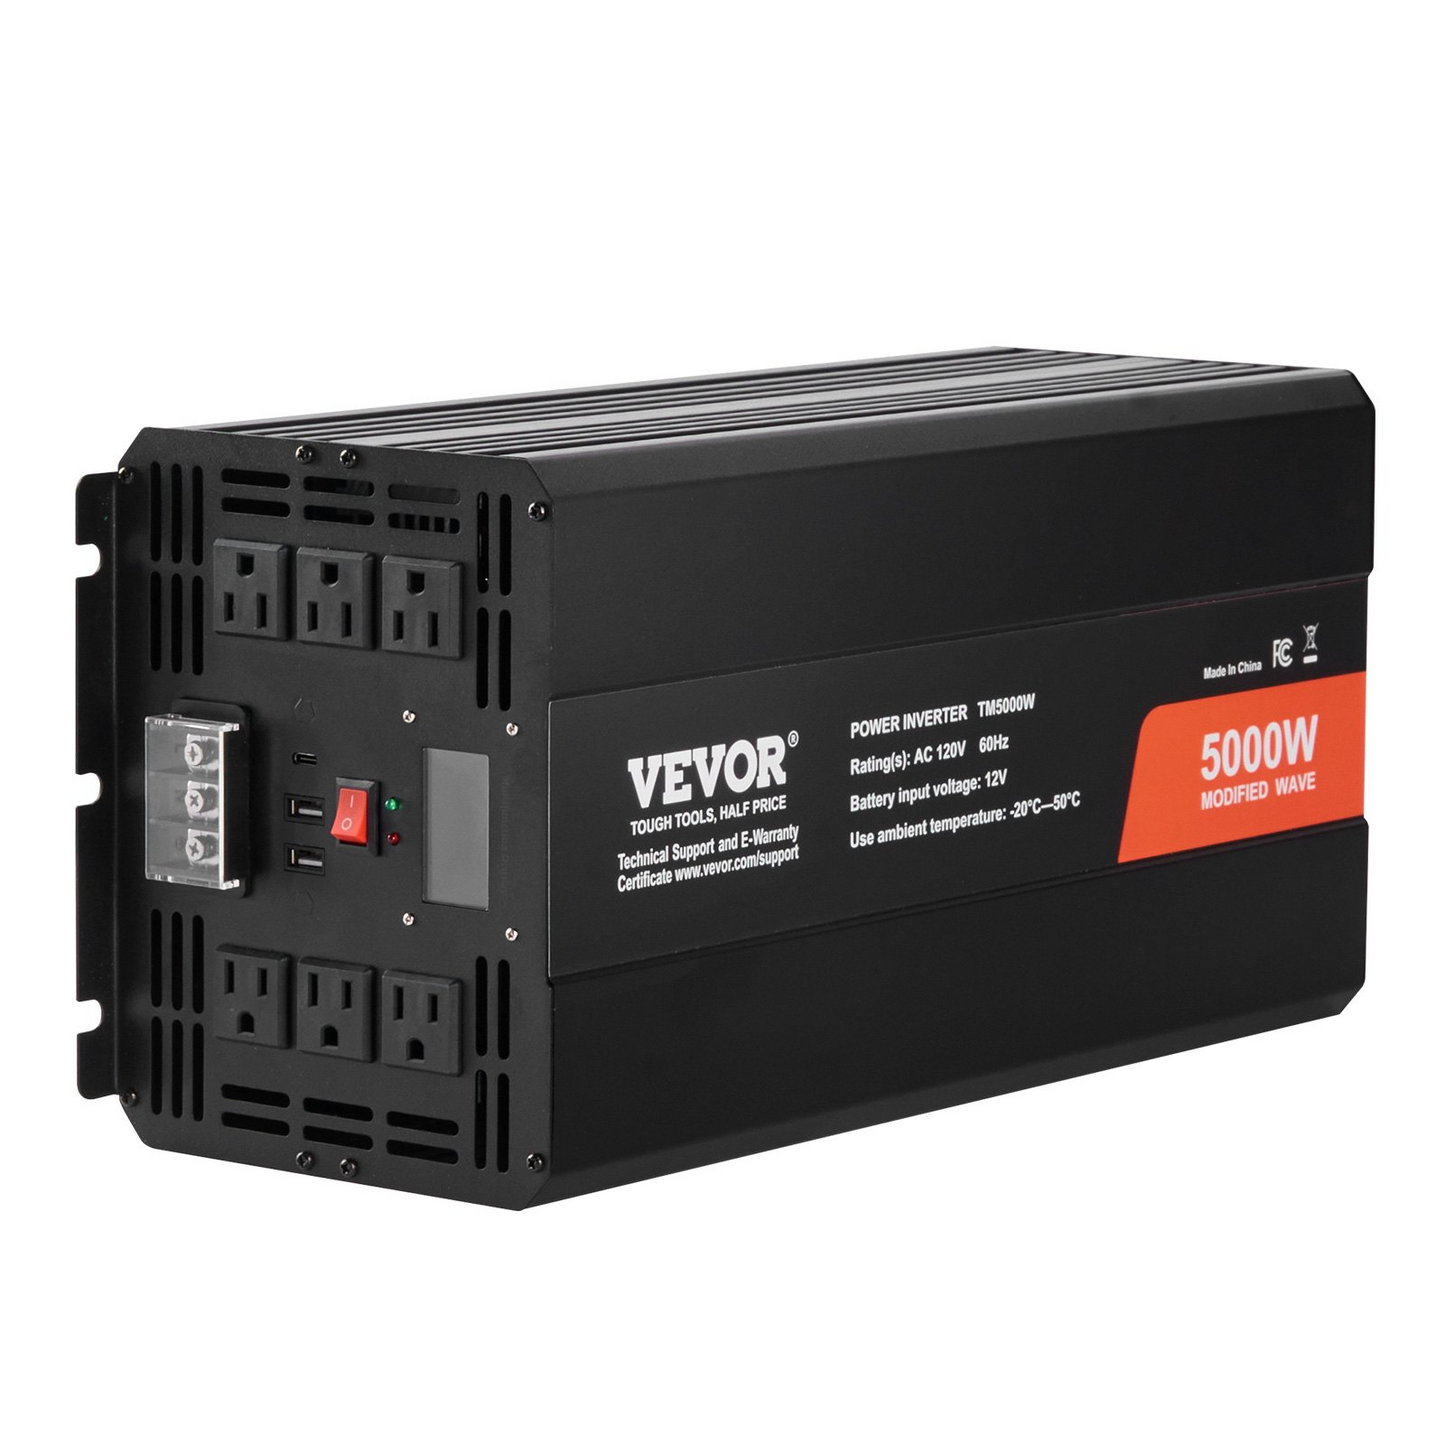 VEVOR Modified Sine Wave Inverter, 5000W, DC 12V to AC 120V Power Inverter with 6 AC Outlets 2 USB Port 1 Type-C Port, LCD Display and Remote Controller for High Load Home Appliances, CE FCC Certified, Goodies N Stuff